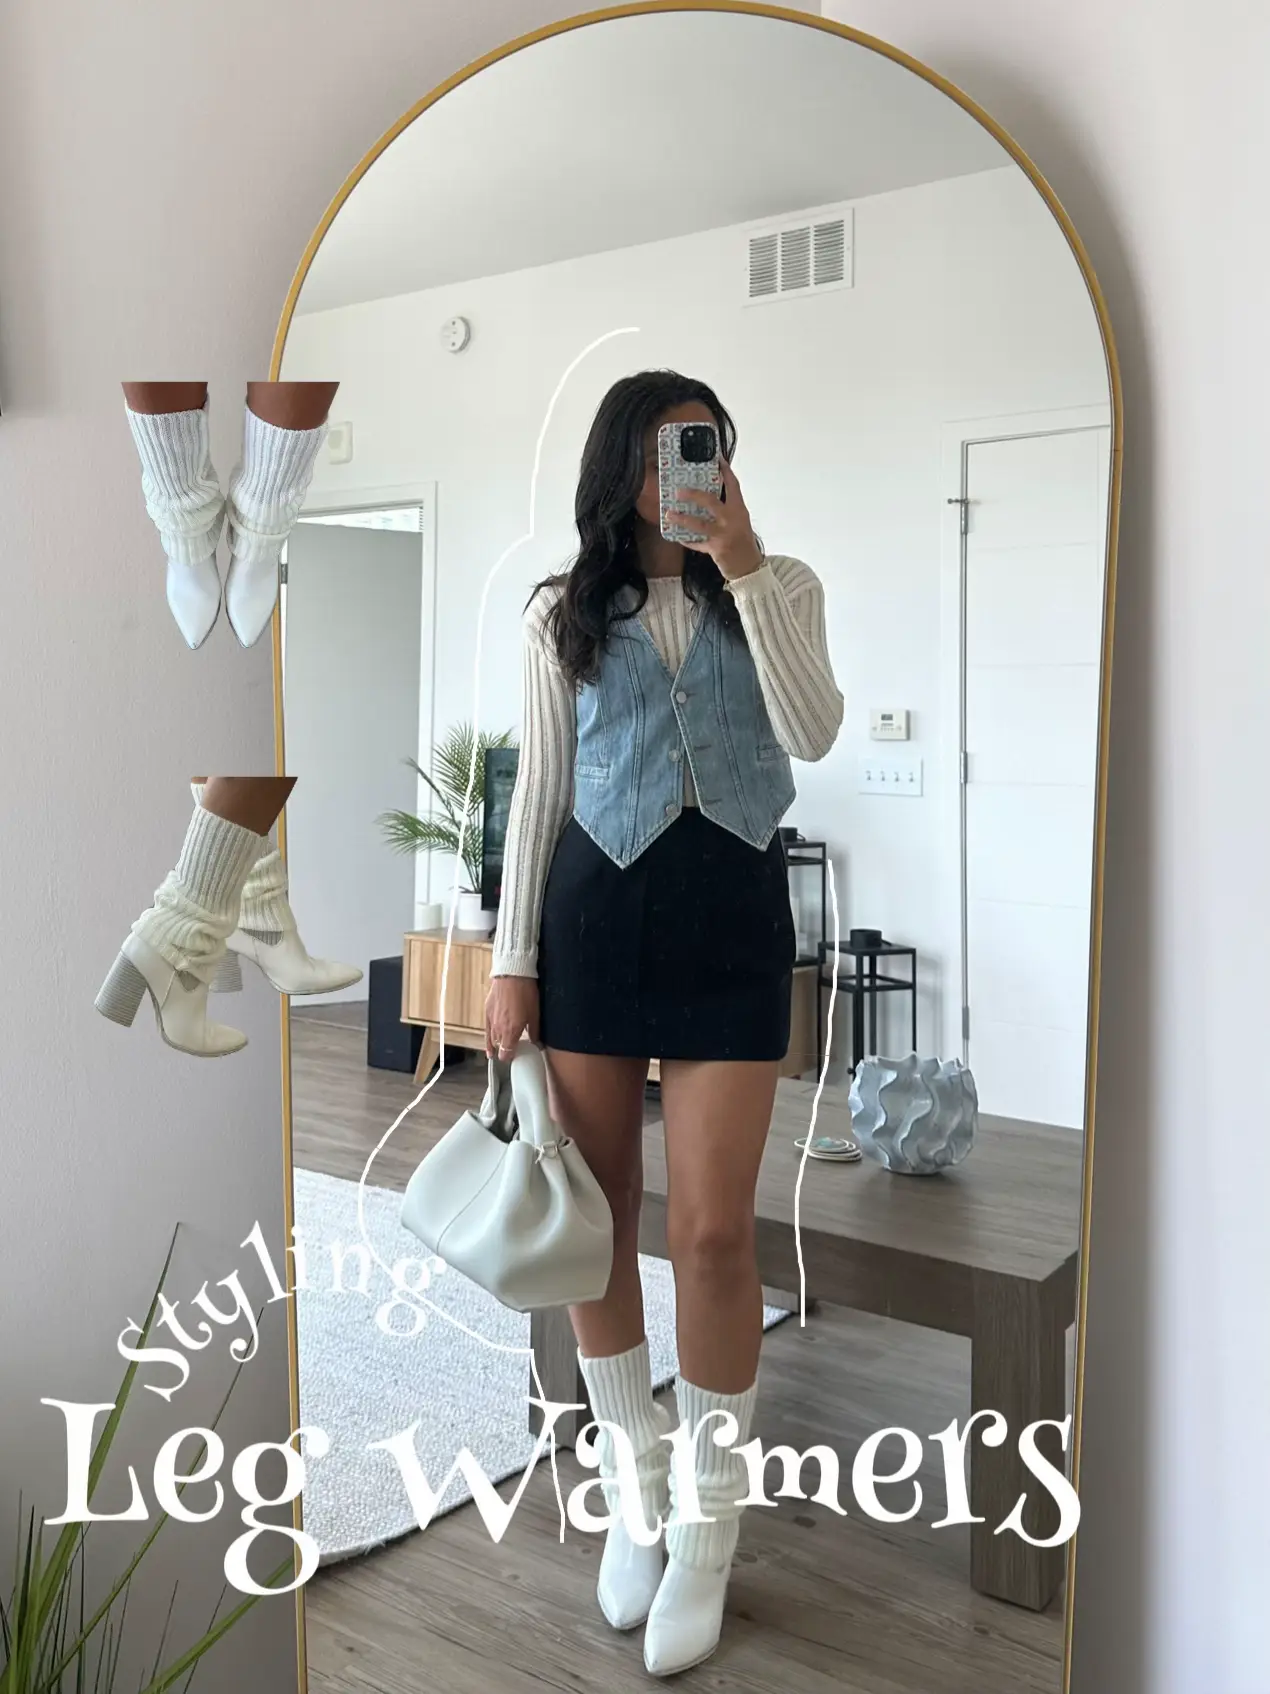 Leg Warmers with ugg Boots  Boots with leg warmers, How to wear